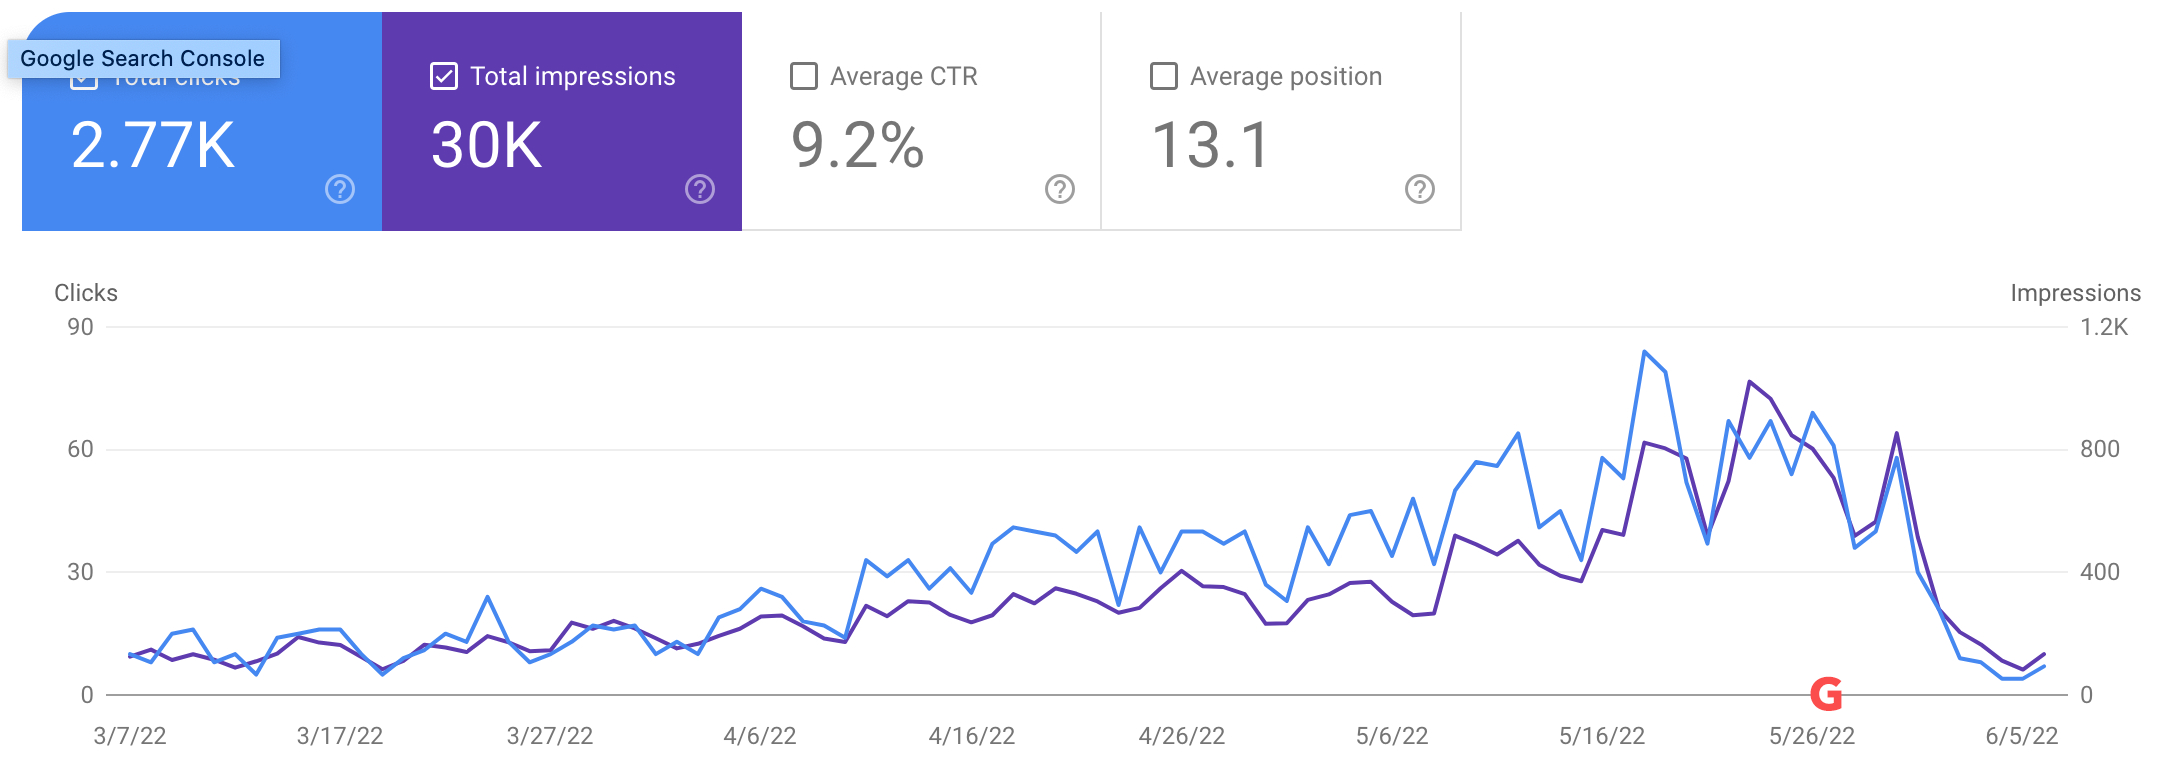 Search console showing declining traffic